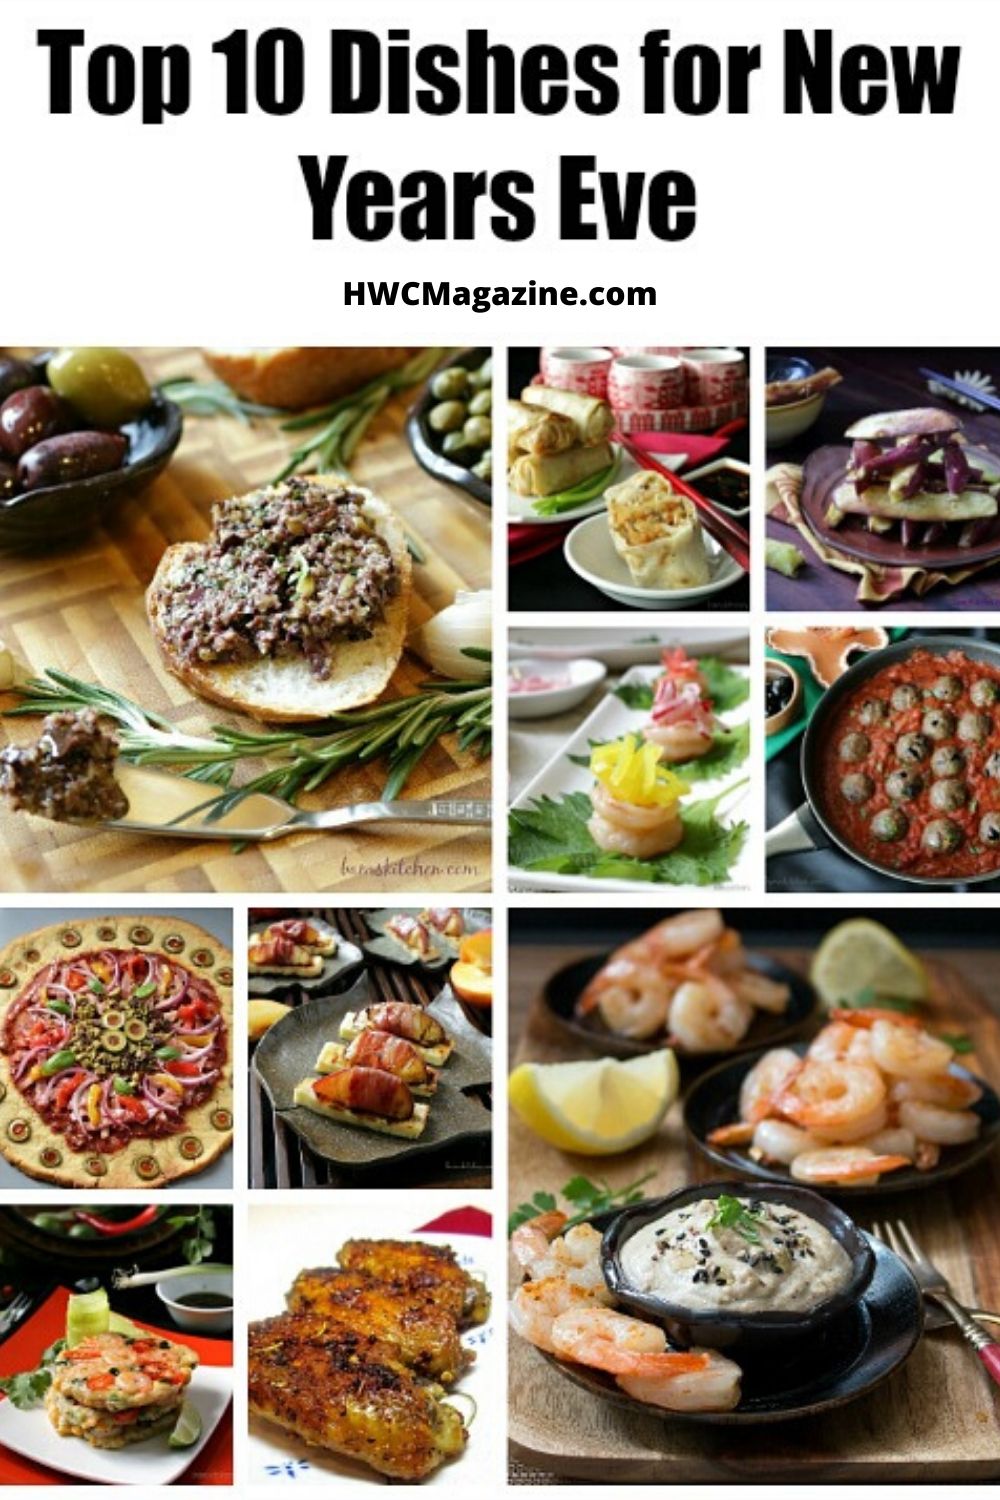 Top 10 Appetizers for New Years Eve / https://www.hwcmagazine.com